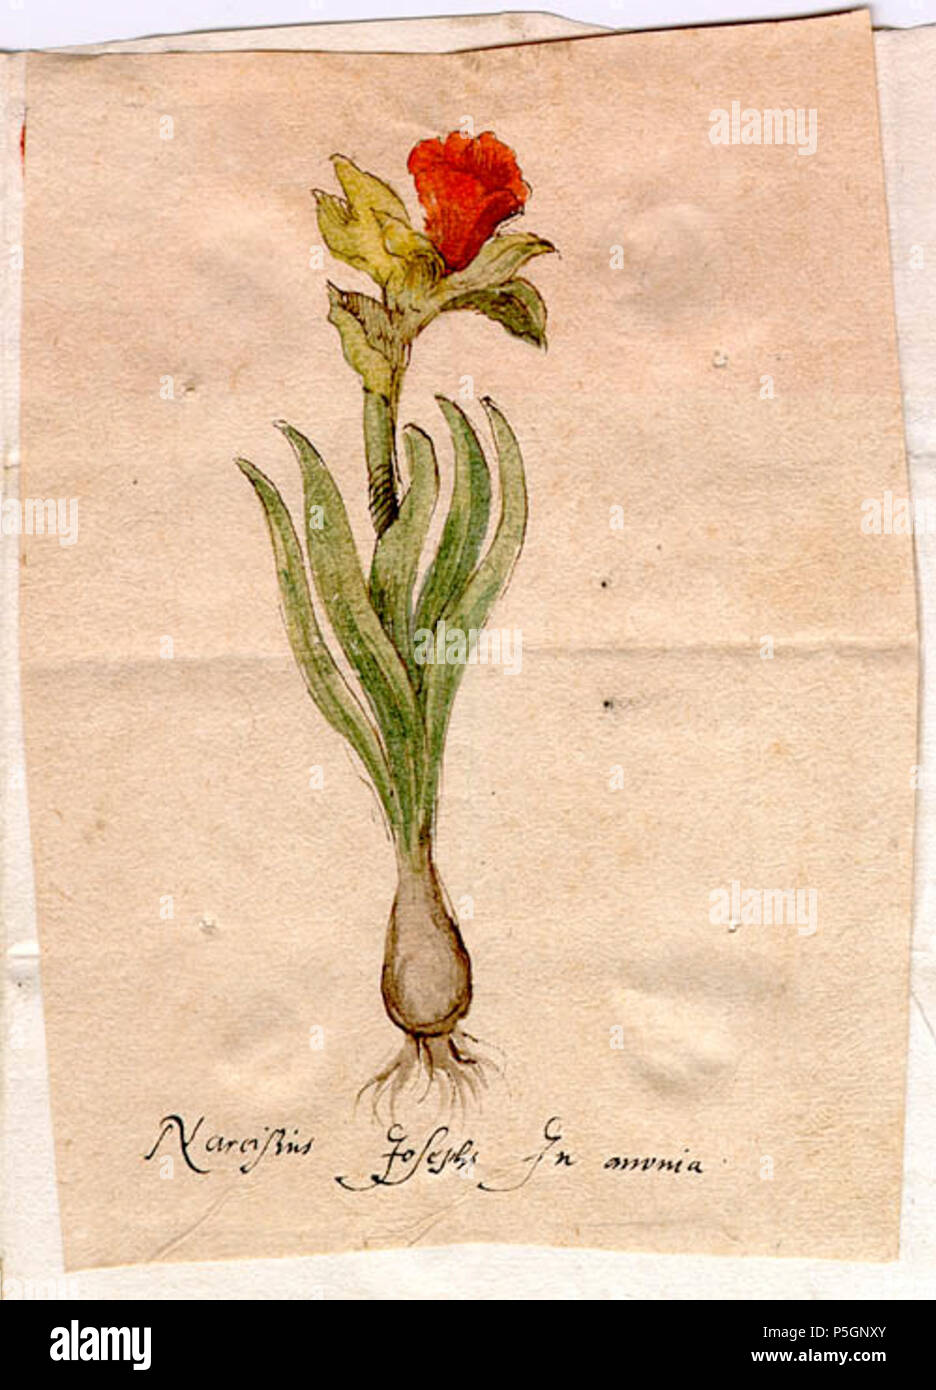 N/A. English: Drawing of a red narcissus belonging to a letter from Carolus  Clusius to Matteo Caccini, Florence, october 10th 1608. [University  Library, BPL 2724 14]. Nederlands: Tekening van een rode narcis